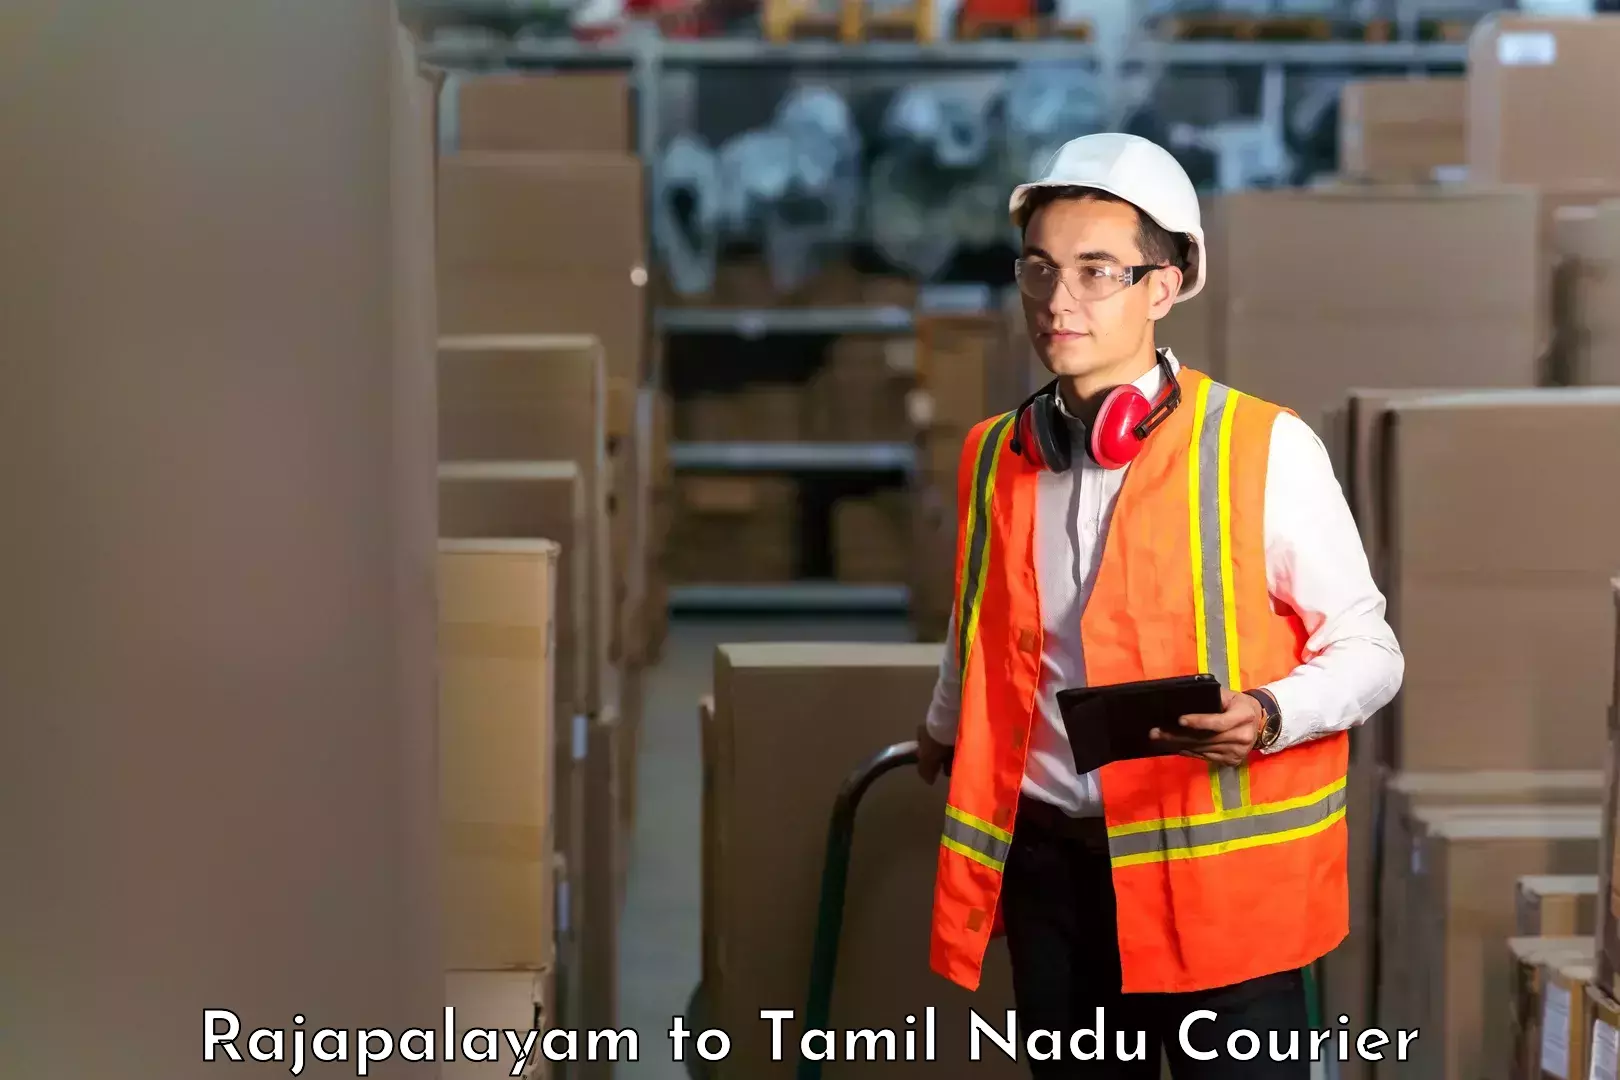 Professional courier handling Rajapalayam to Attur